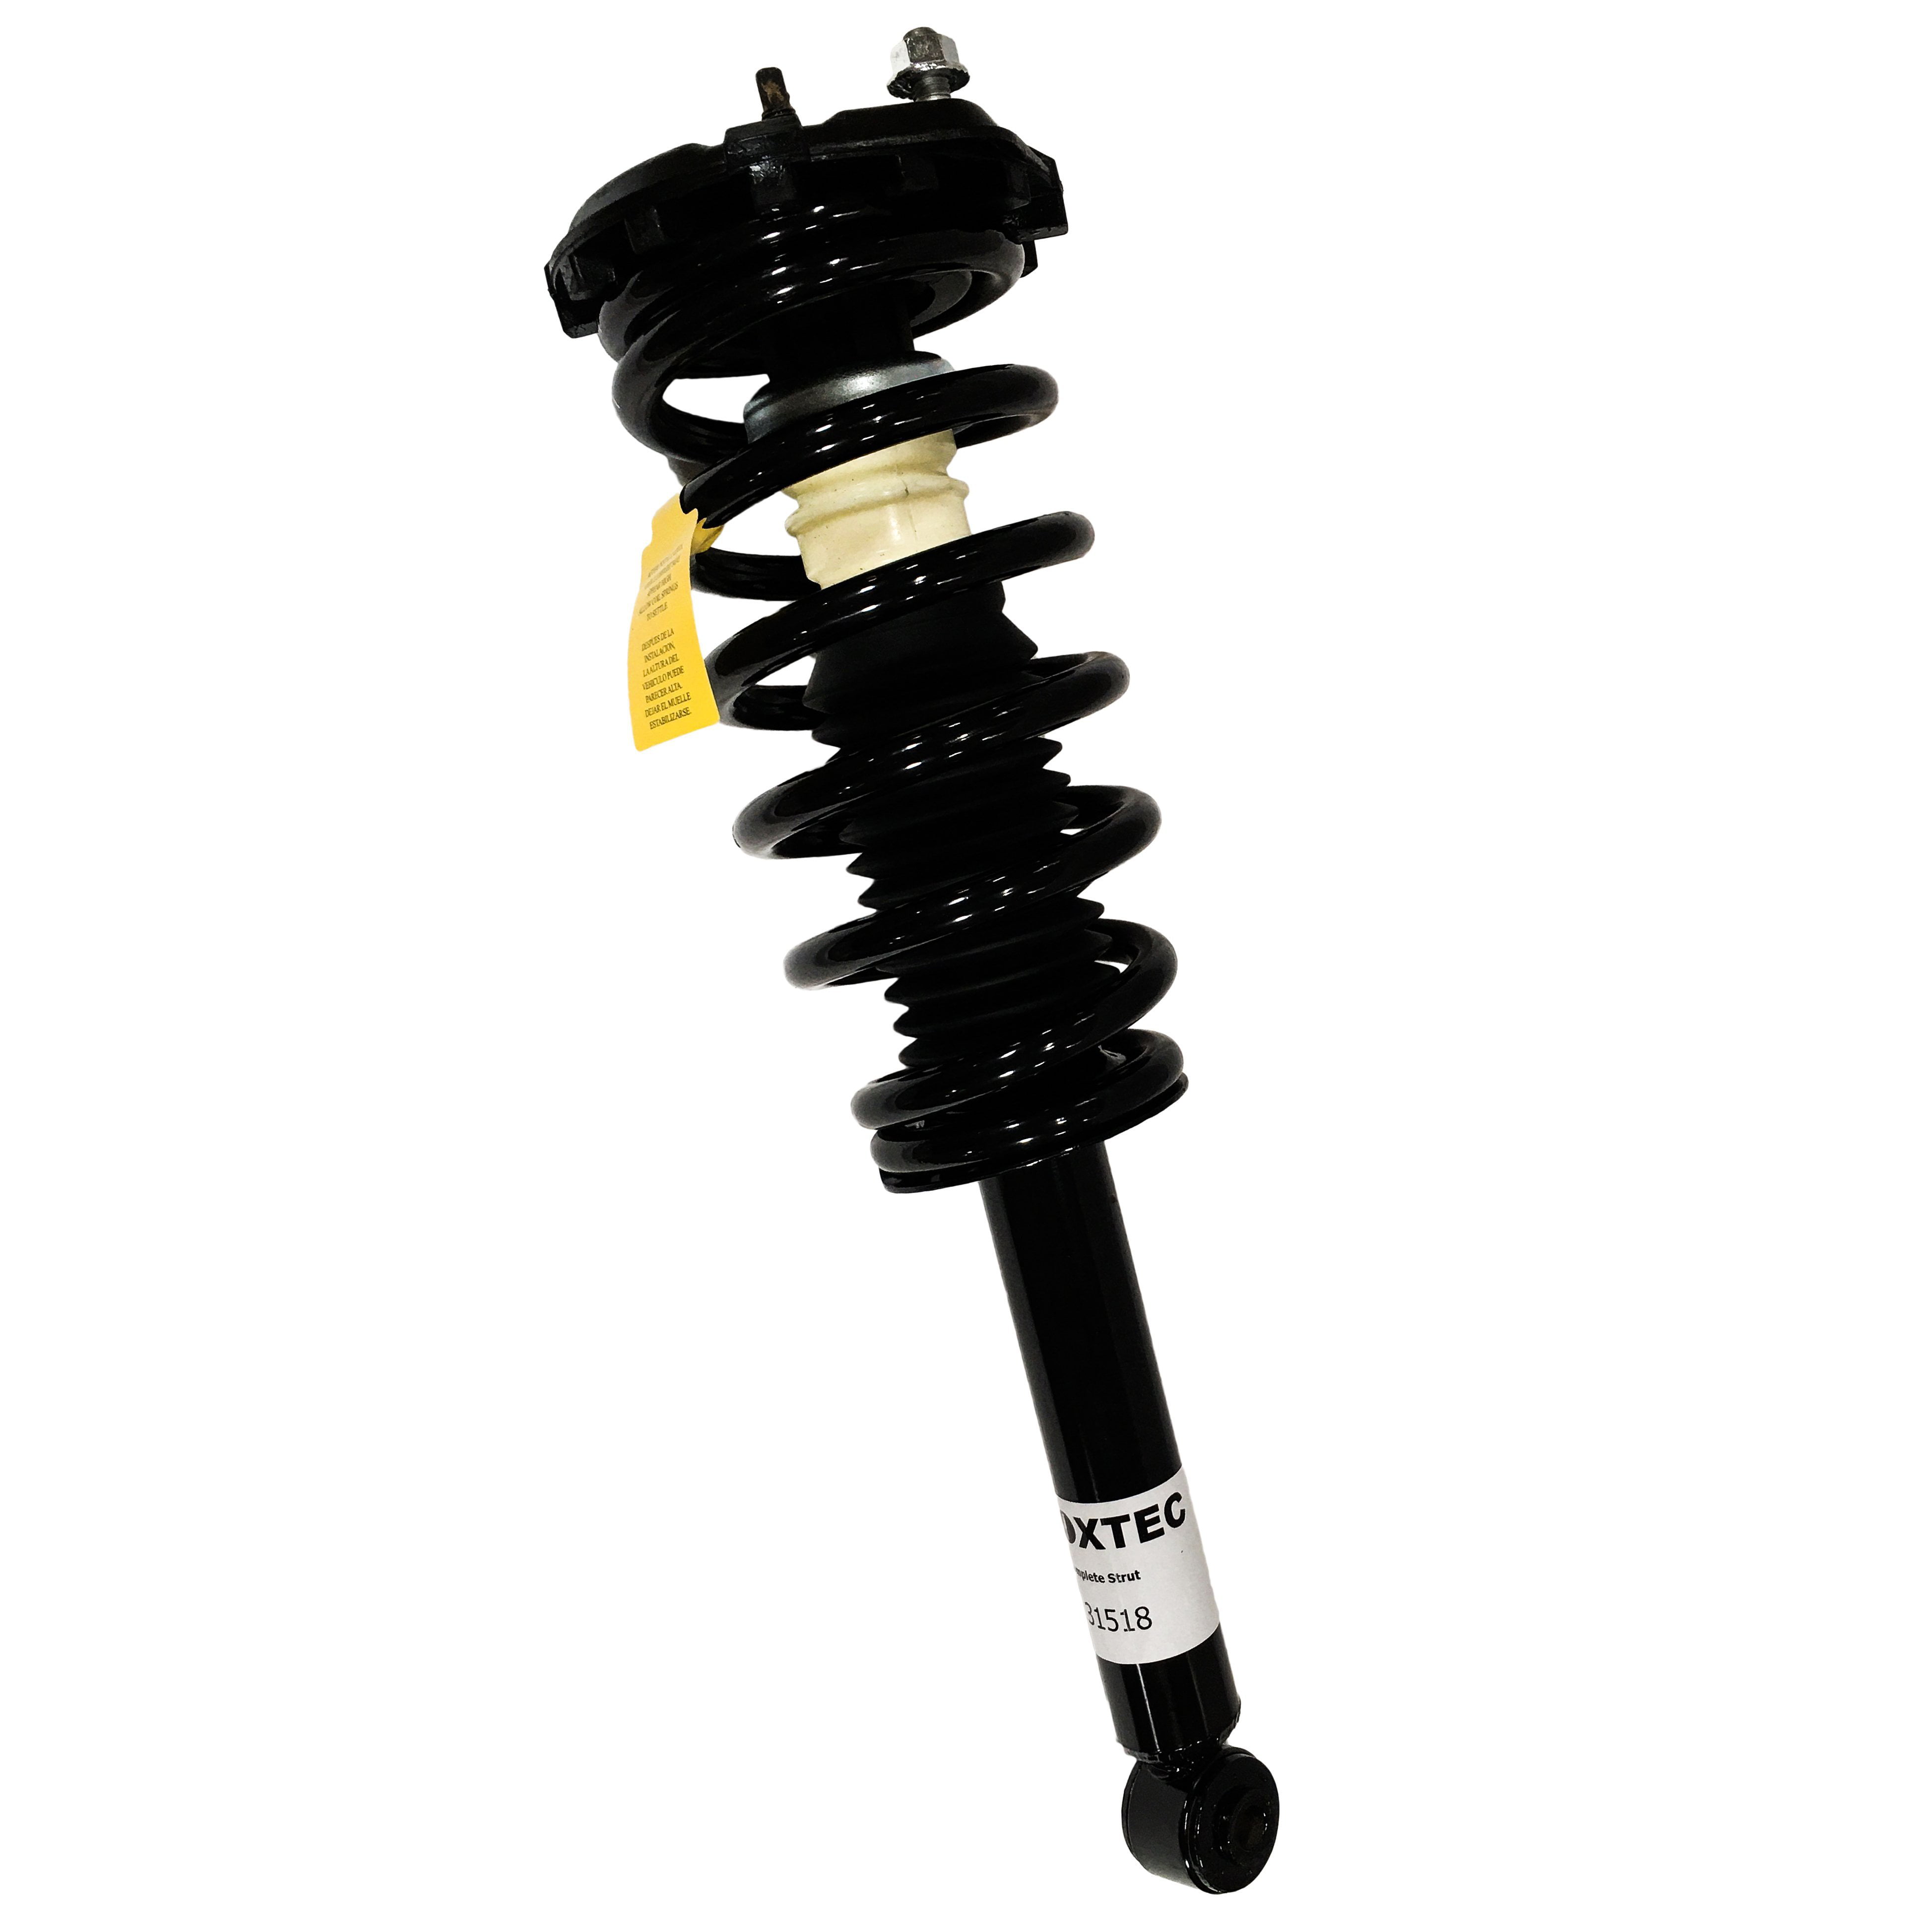 AUTOMUTO Strut Spring Assembly Front Pair Shock Absorber Fit 1997-2001 Toyota Camry,1999-2003 Toyota Solara 800386-5227-1559176821 